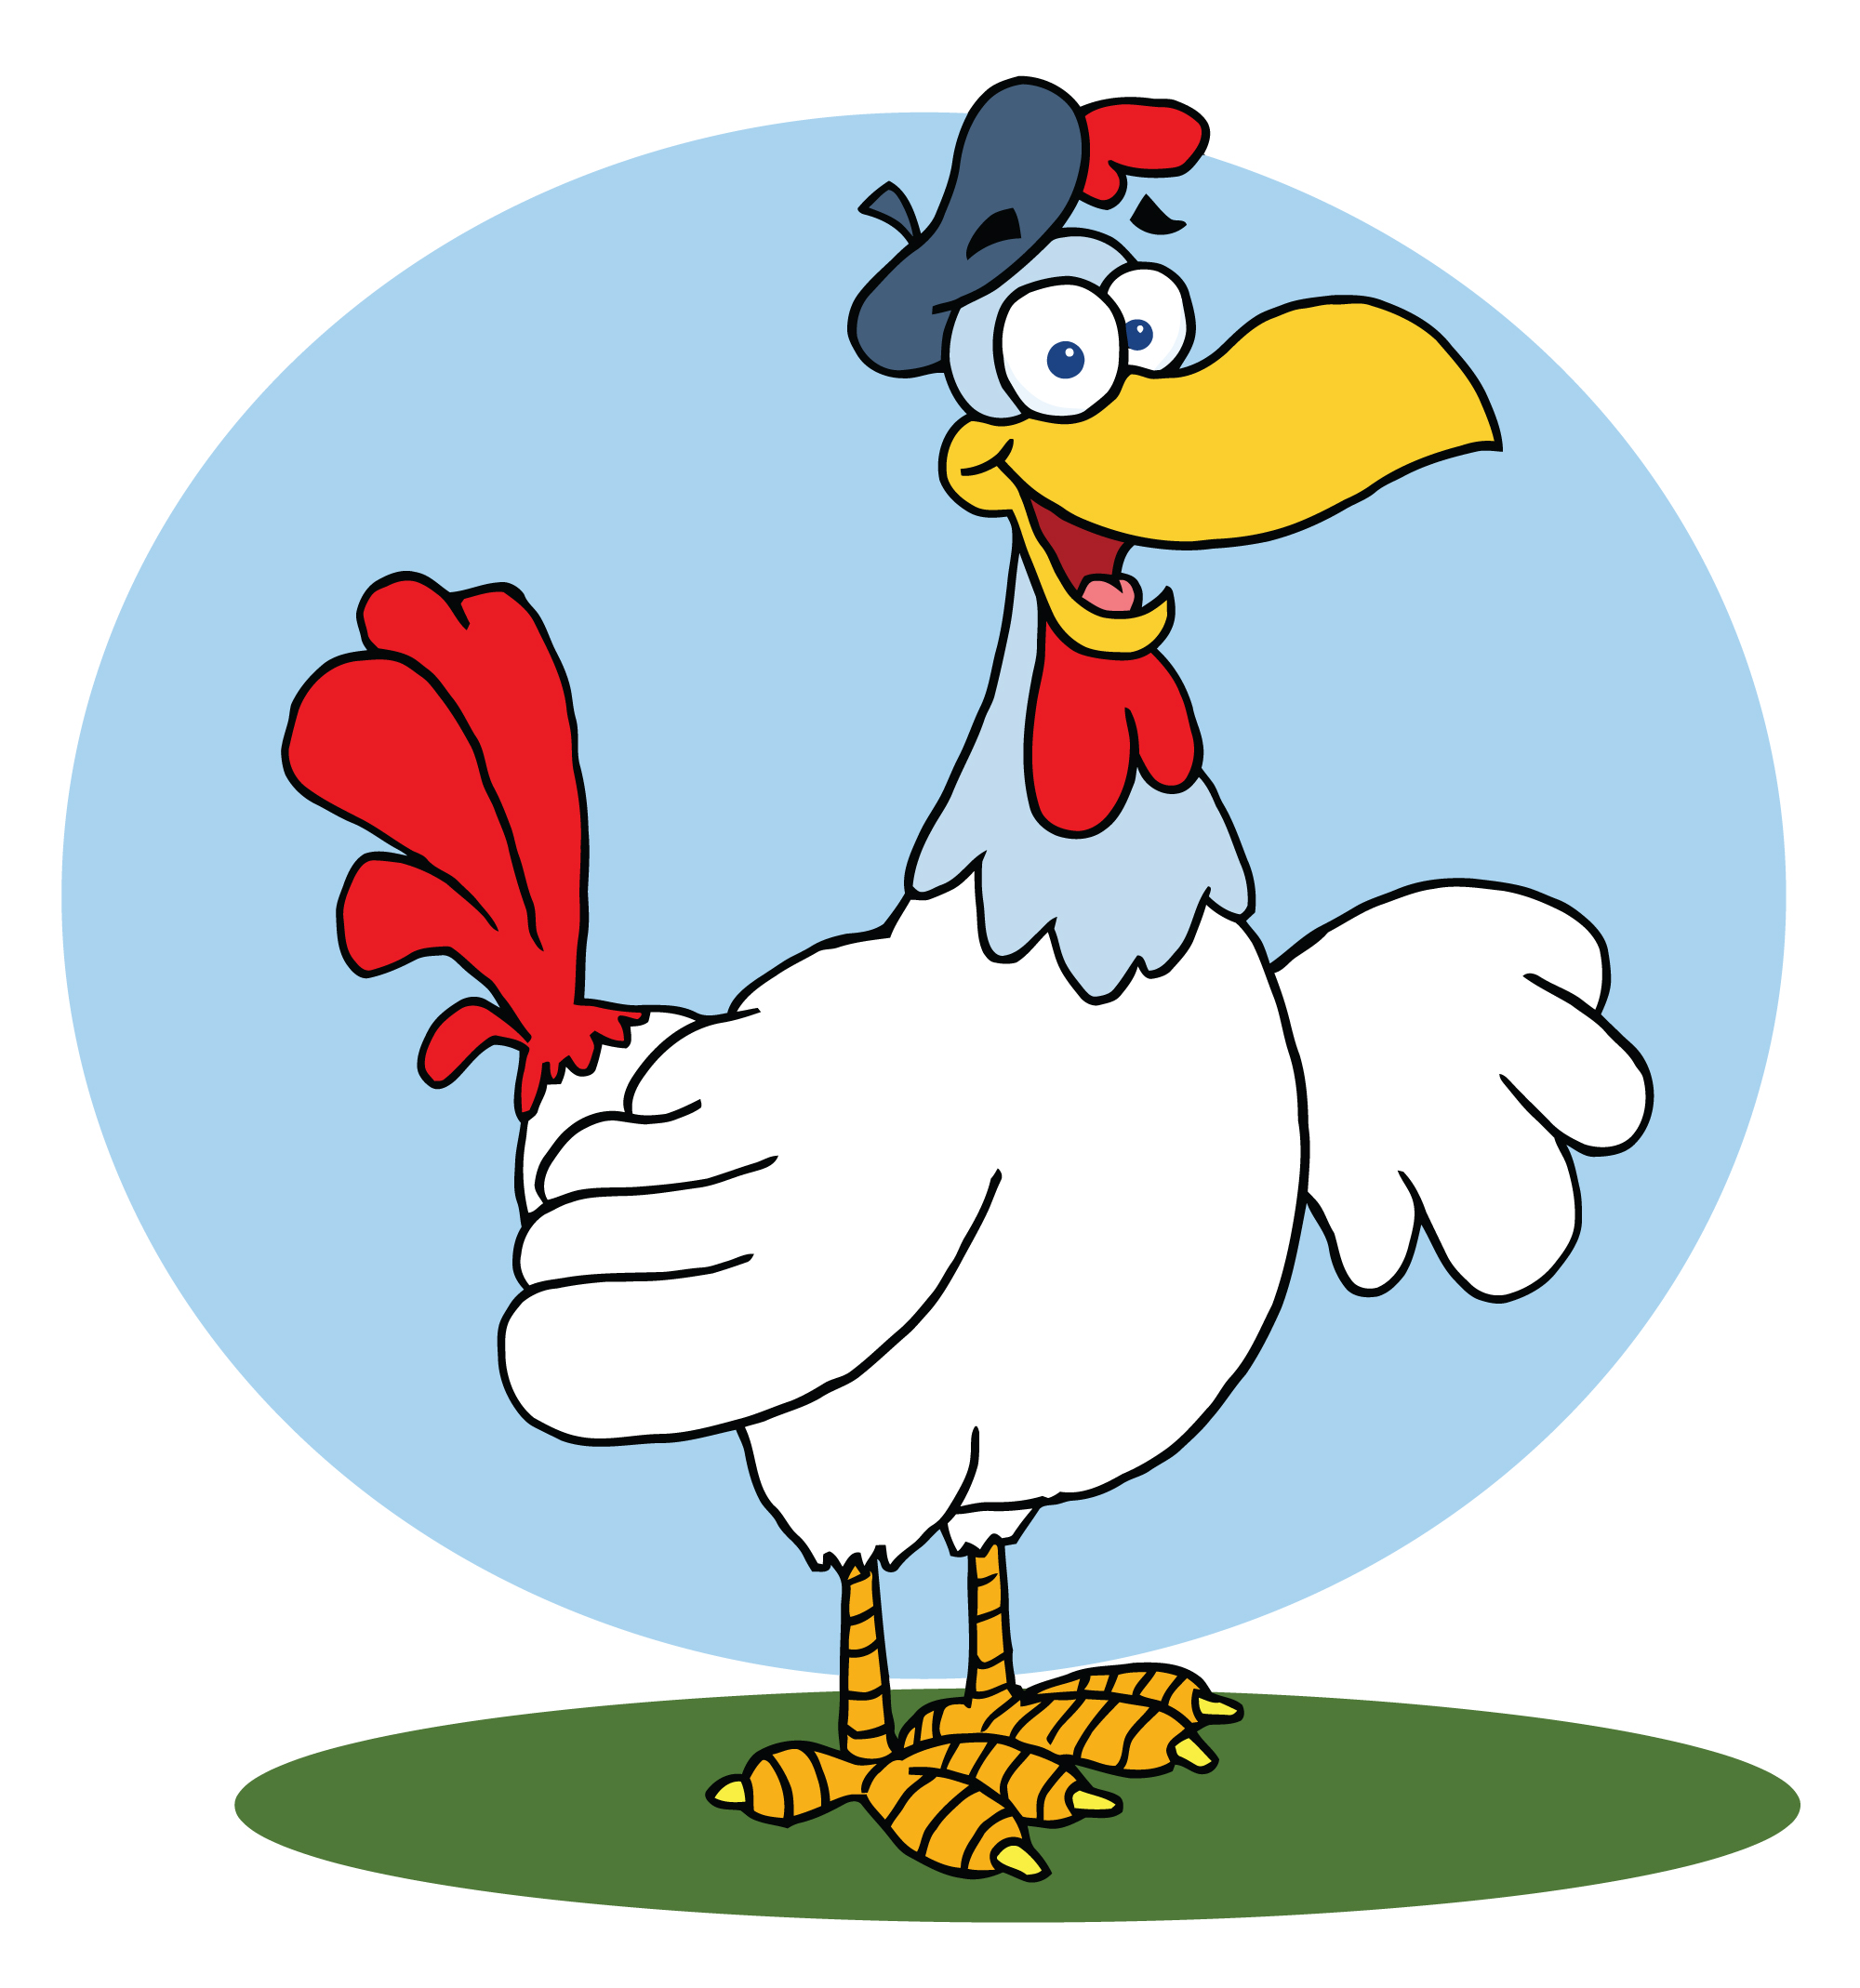 Chicken dinner clipart free clipart images